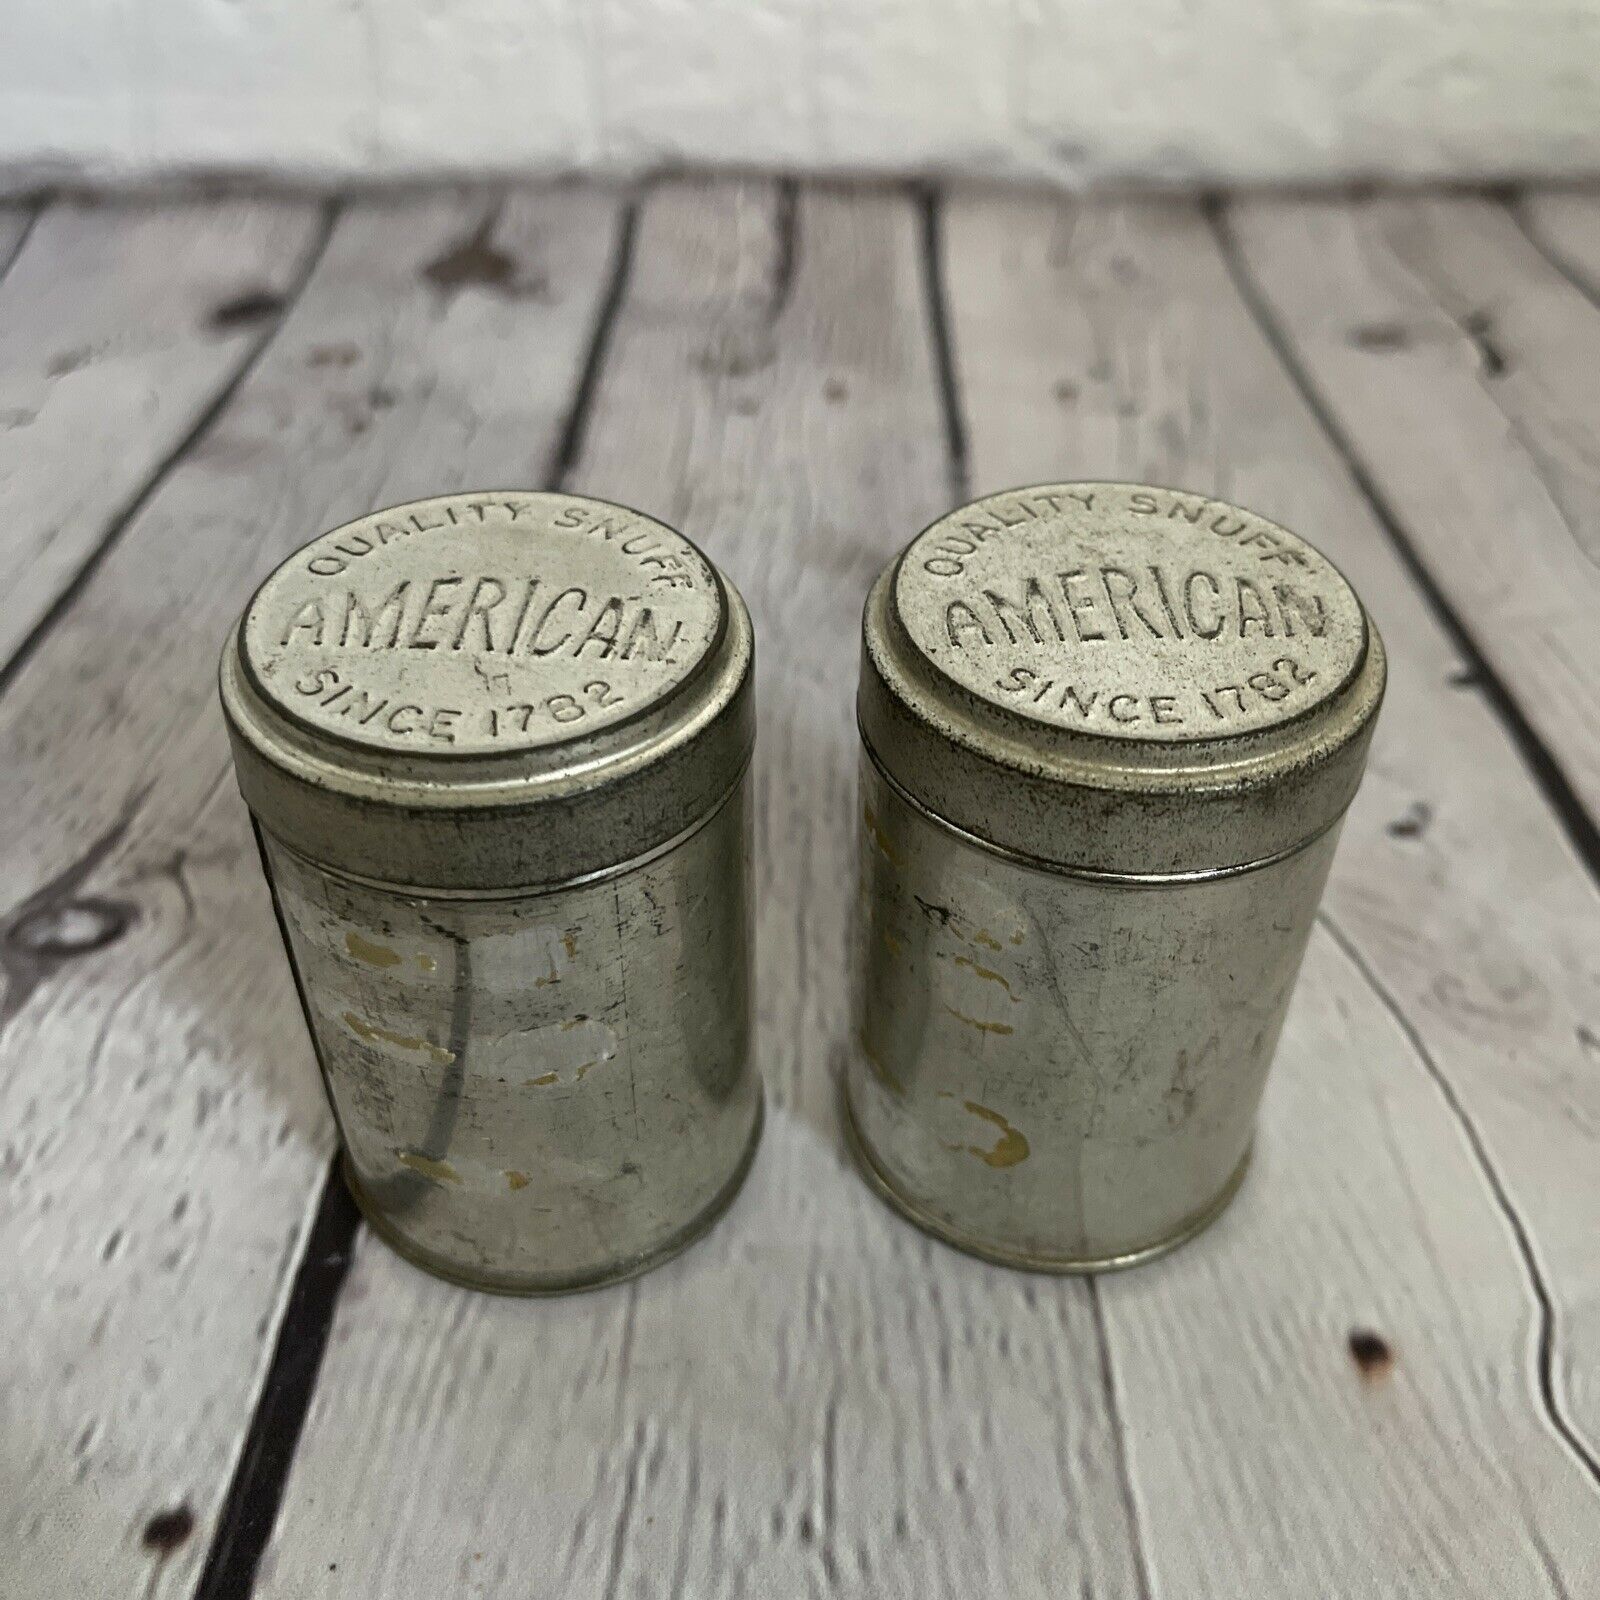 Vtg Lot AMERICAN QUALITY SNUFF CANS With Lid Since 1782 Small Round Empty Tin